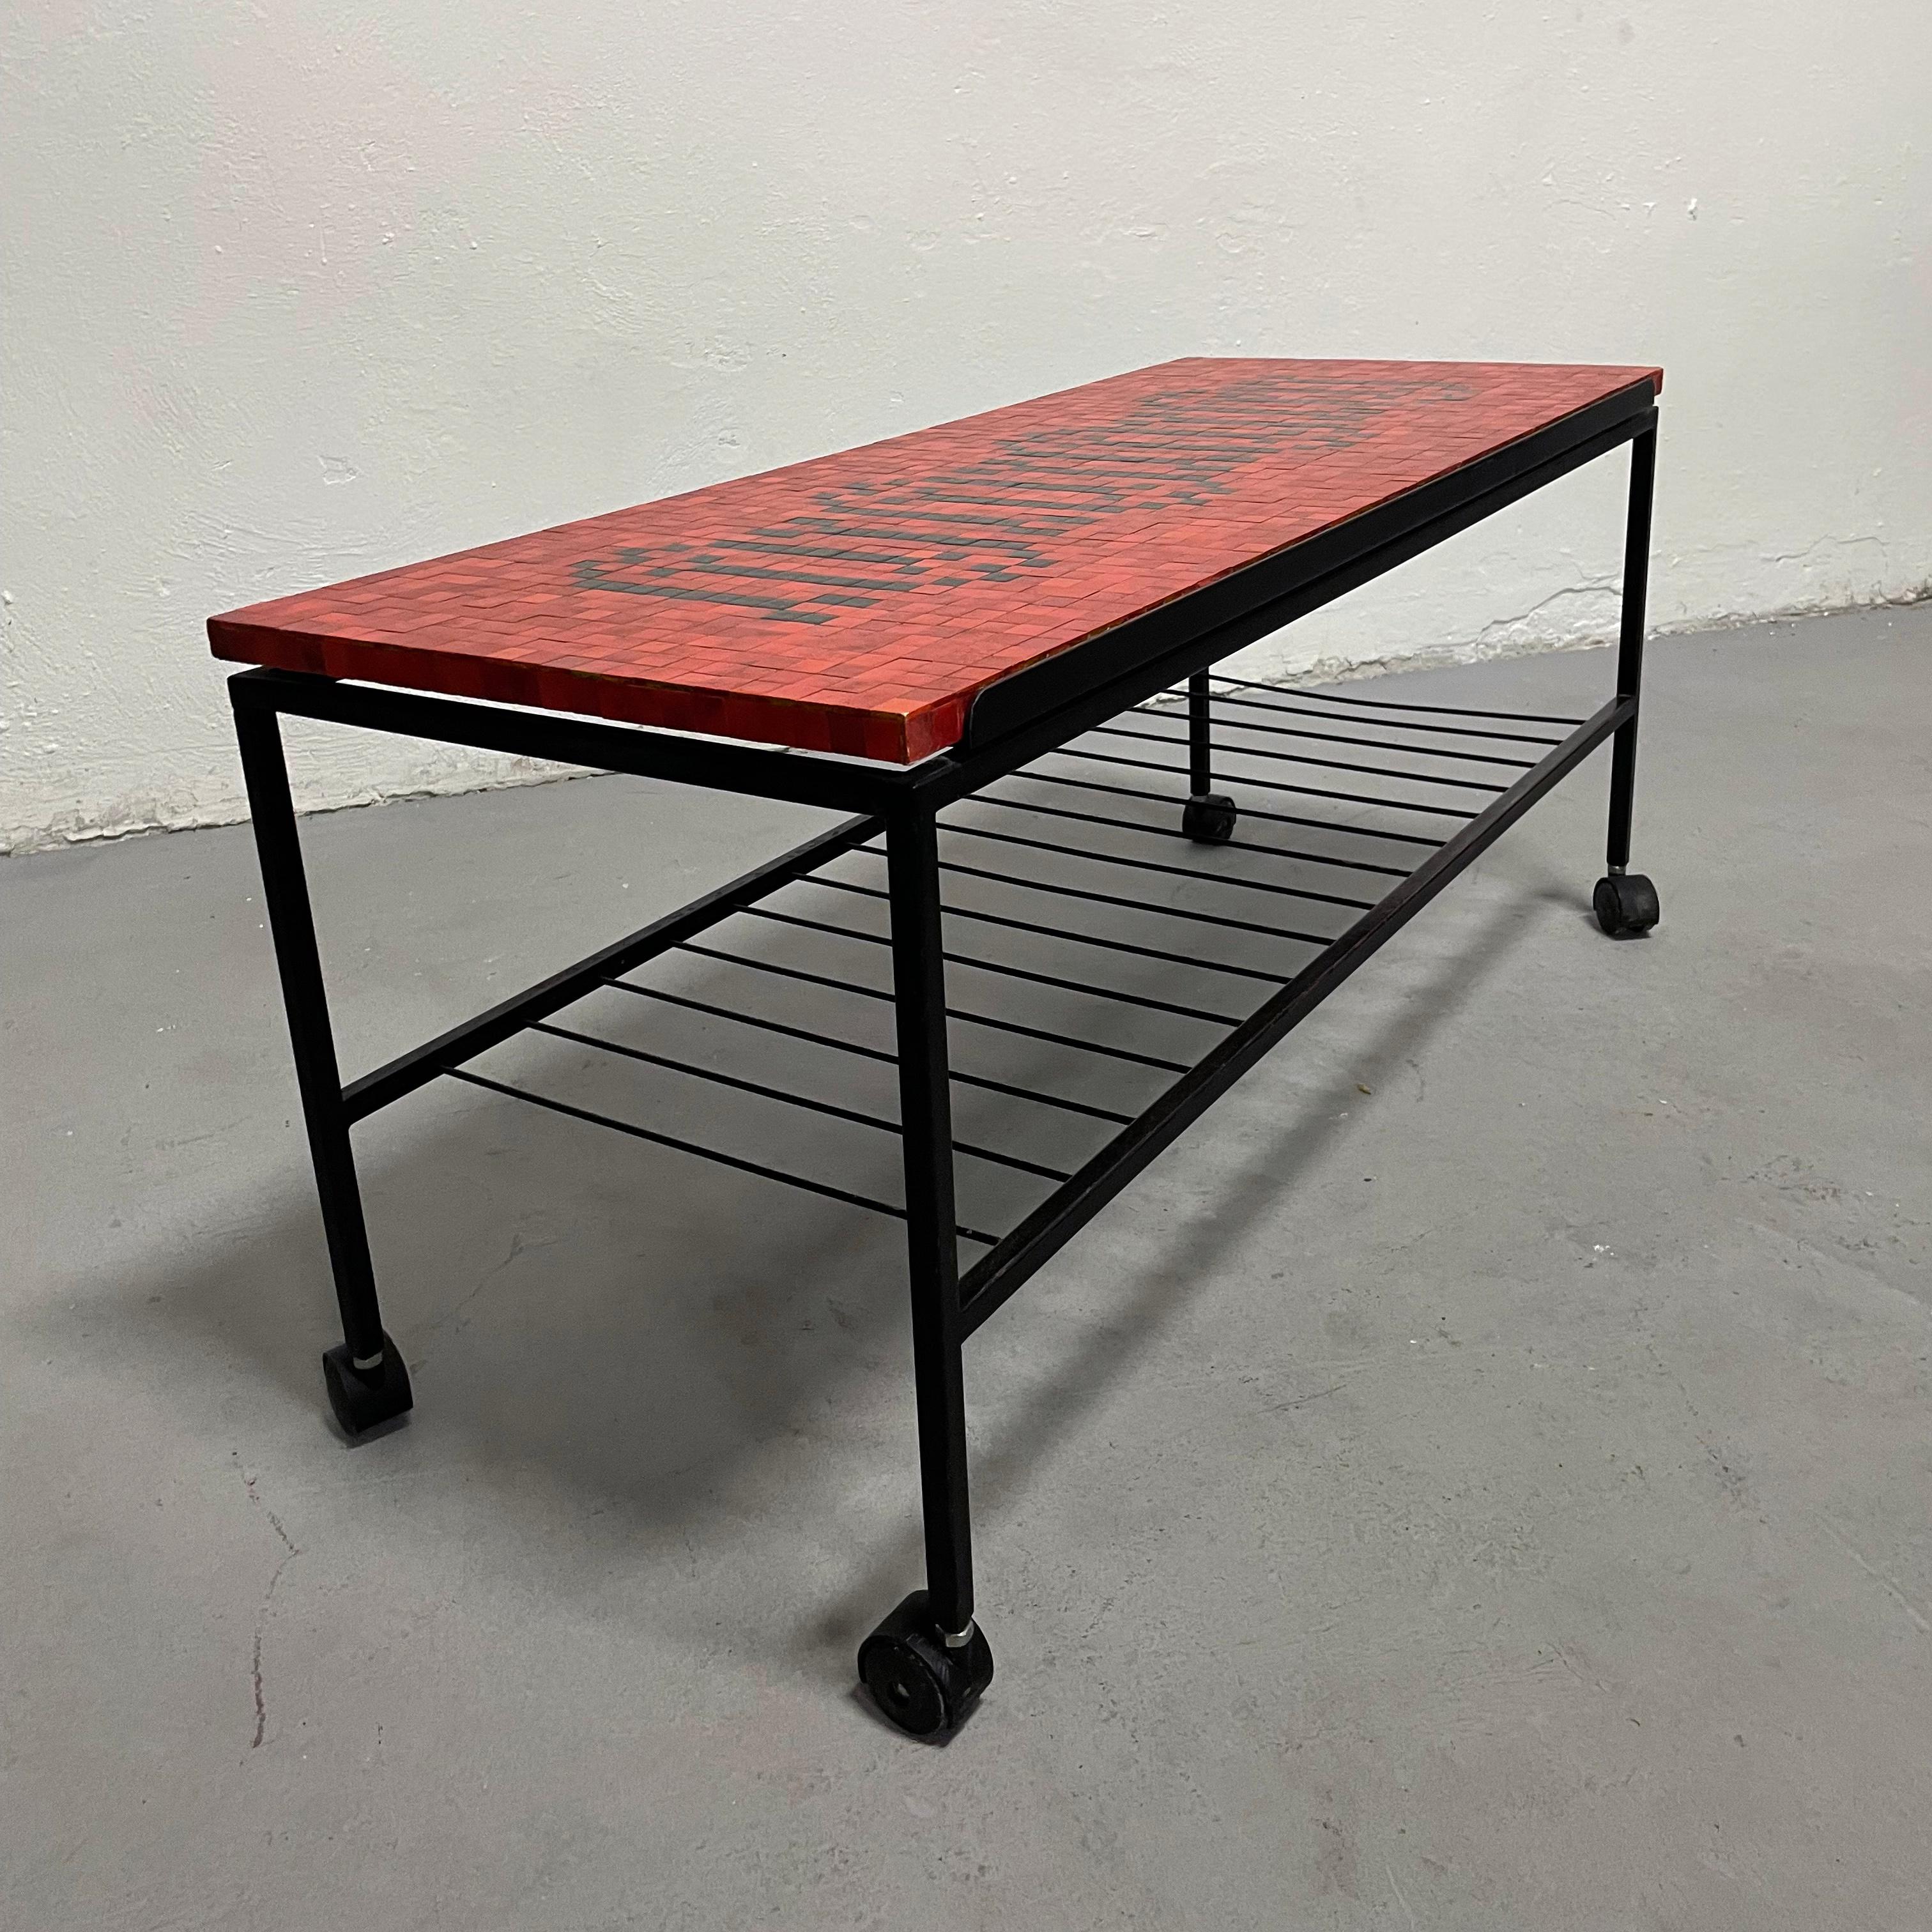 Glazed Mosaic Tile Coffee Table, Serving Bar Cart, Metal and Ceramic, 1950s For Sale